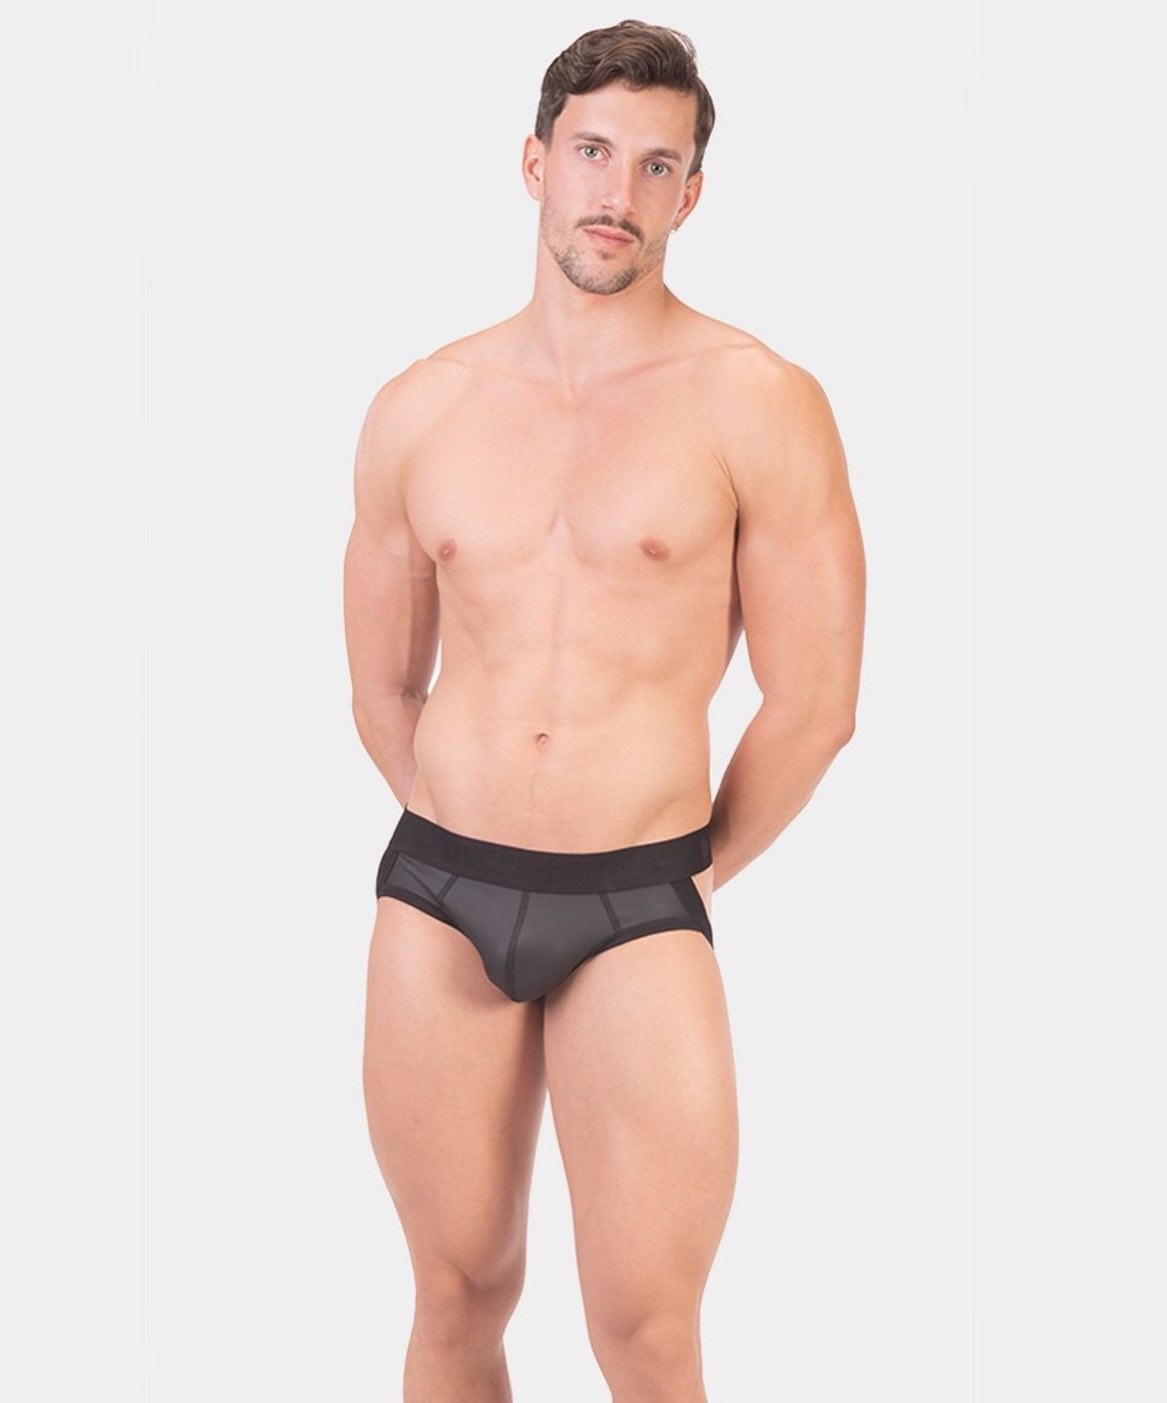 Innovative fabric meets fetish inspiration in the all-black Jock Miko by Barcode Berlin. Check it out:
____
https://menandunderwear.com/shop/underwear/barcode-berlin-jock-miko-black-